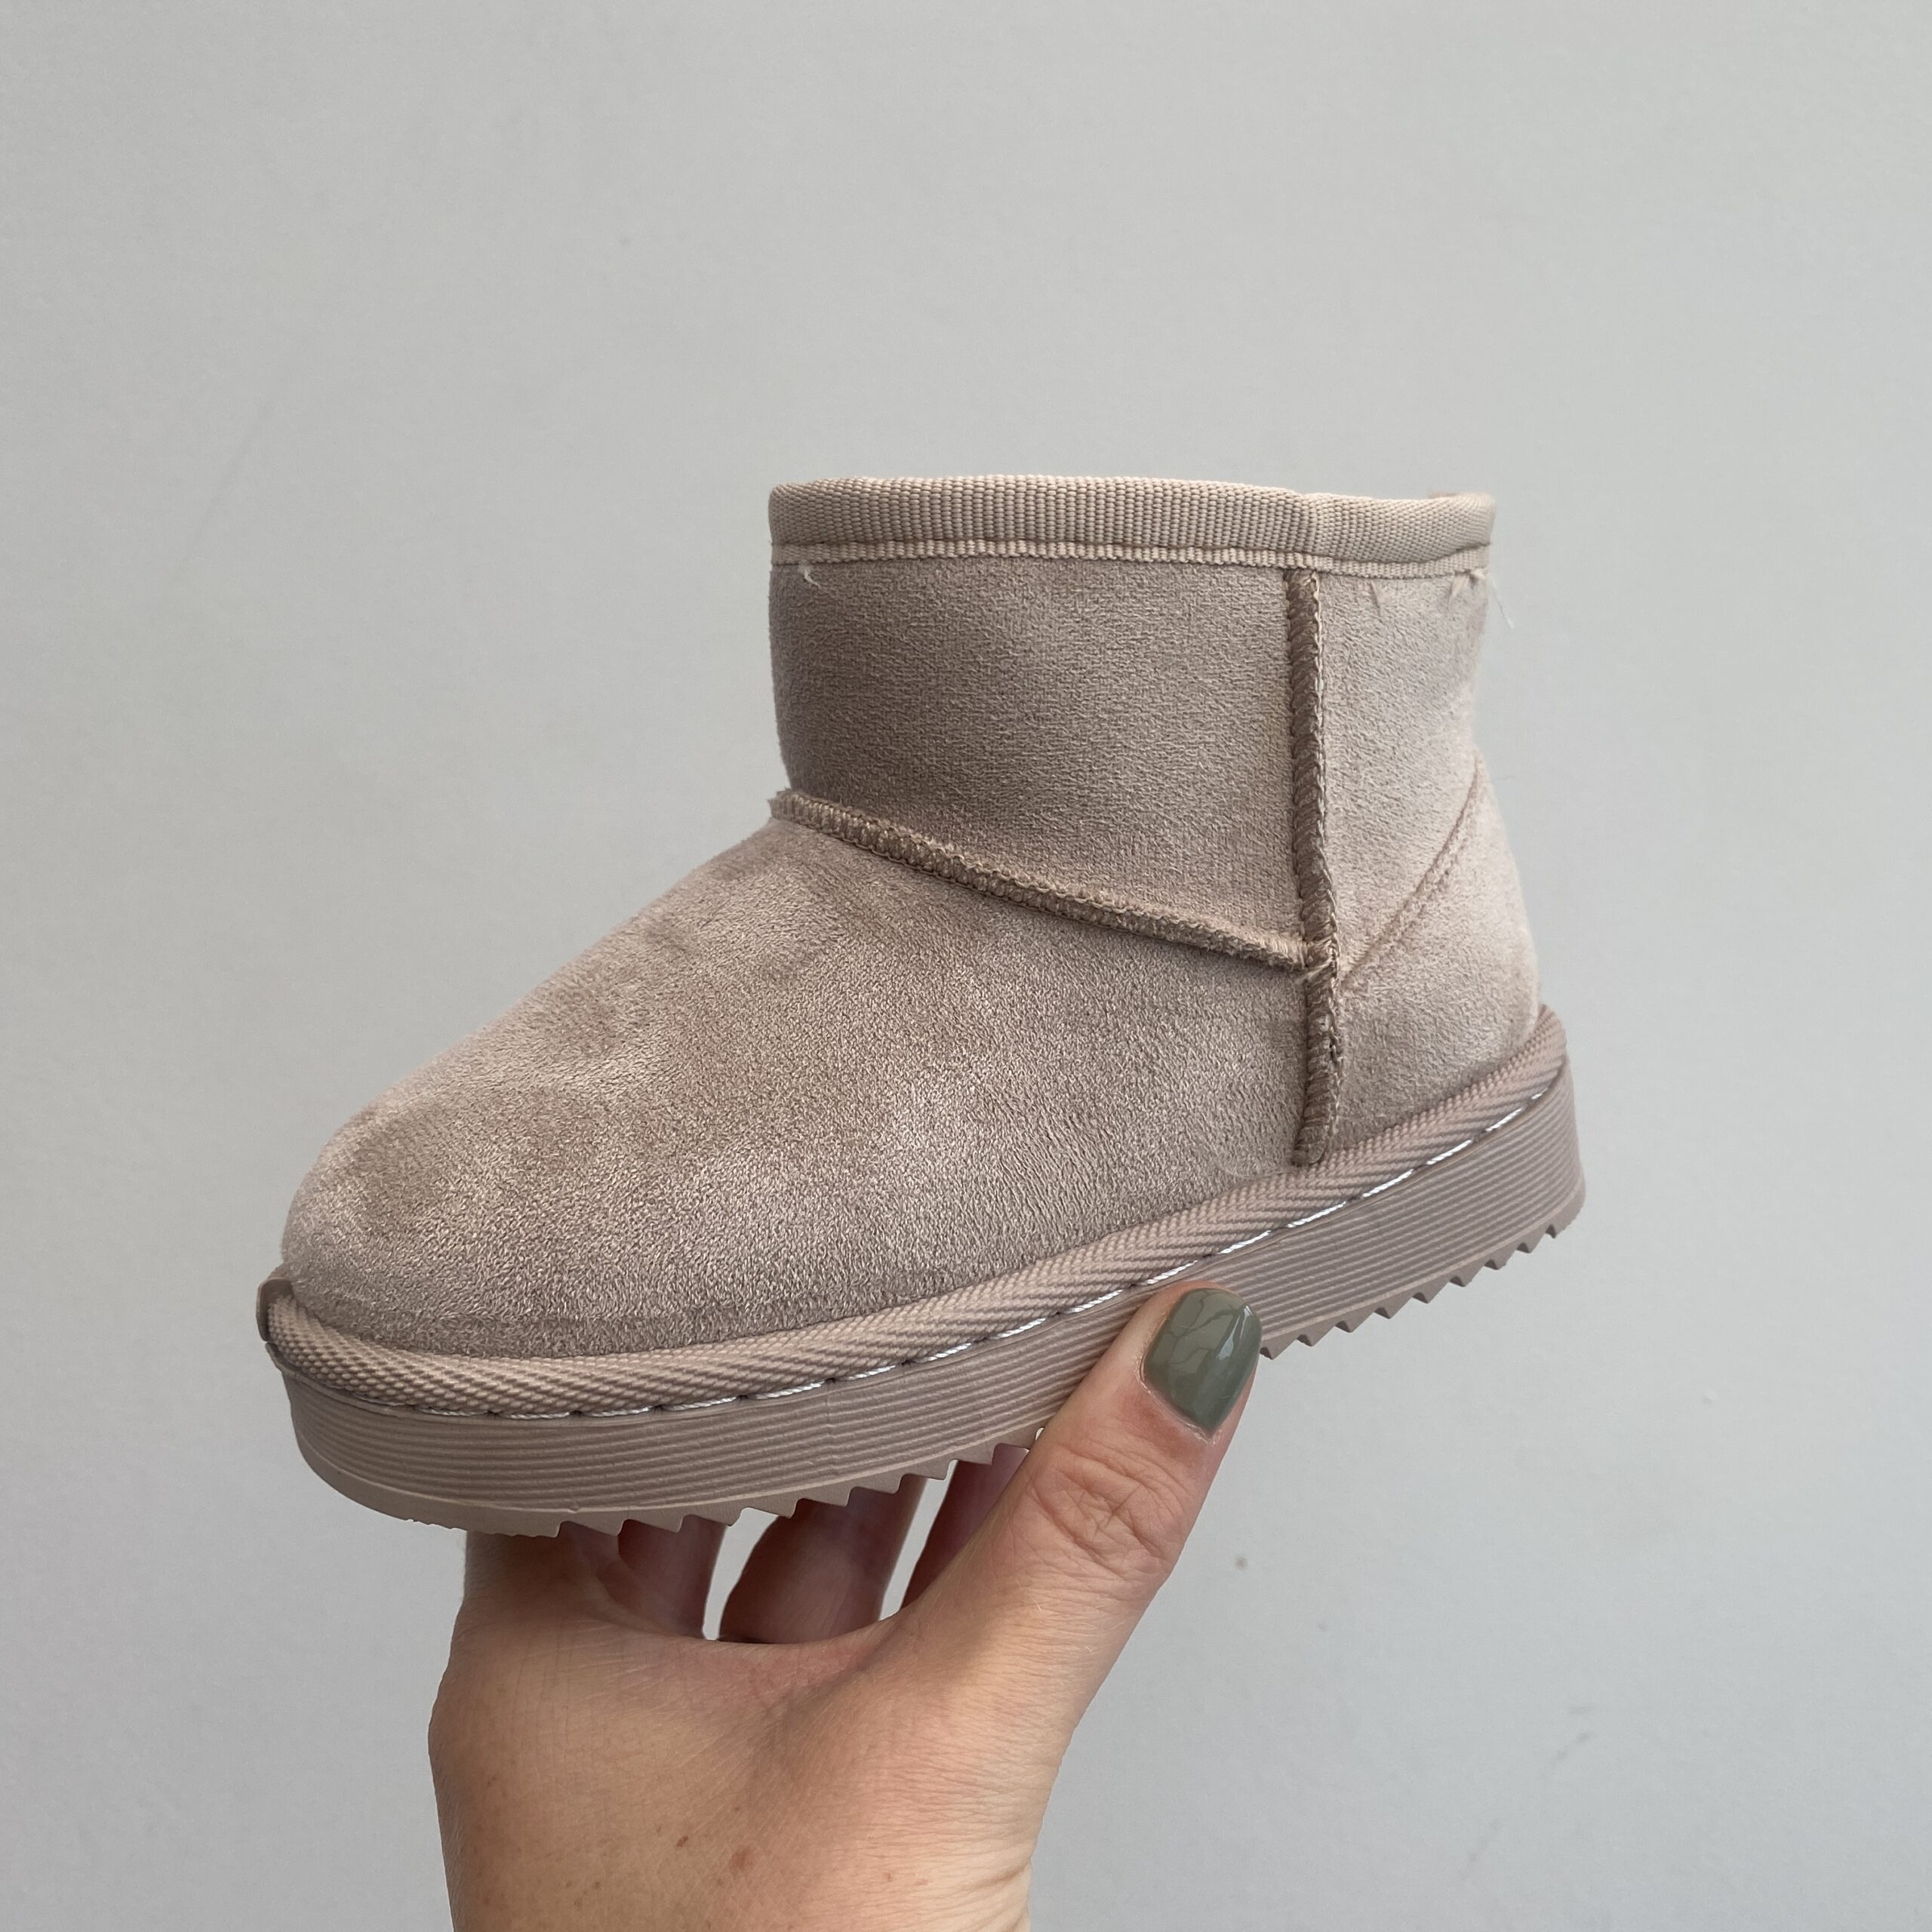 Itty Bitty Beige Snuggle Boots - Perfect for Your Little One